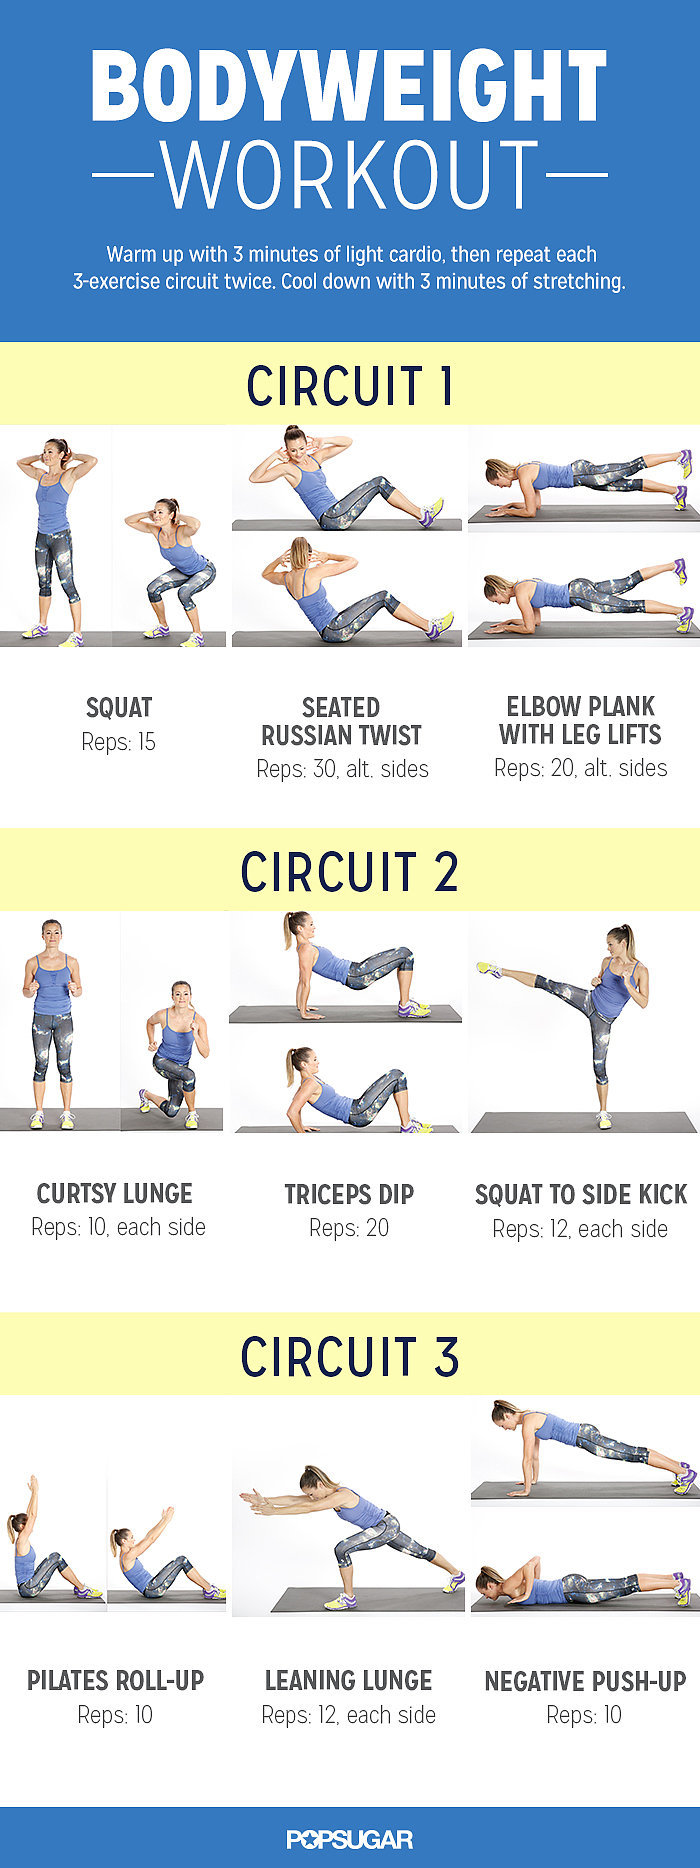 Fitness, Health & Well-Being | This At-Home Bodyweight Workout Leaves